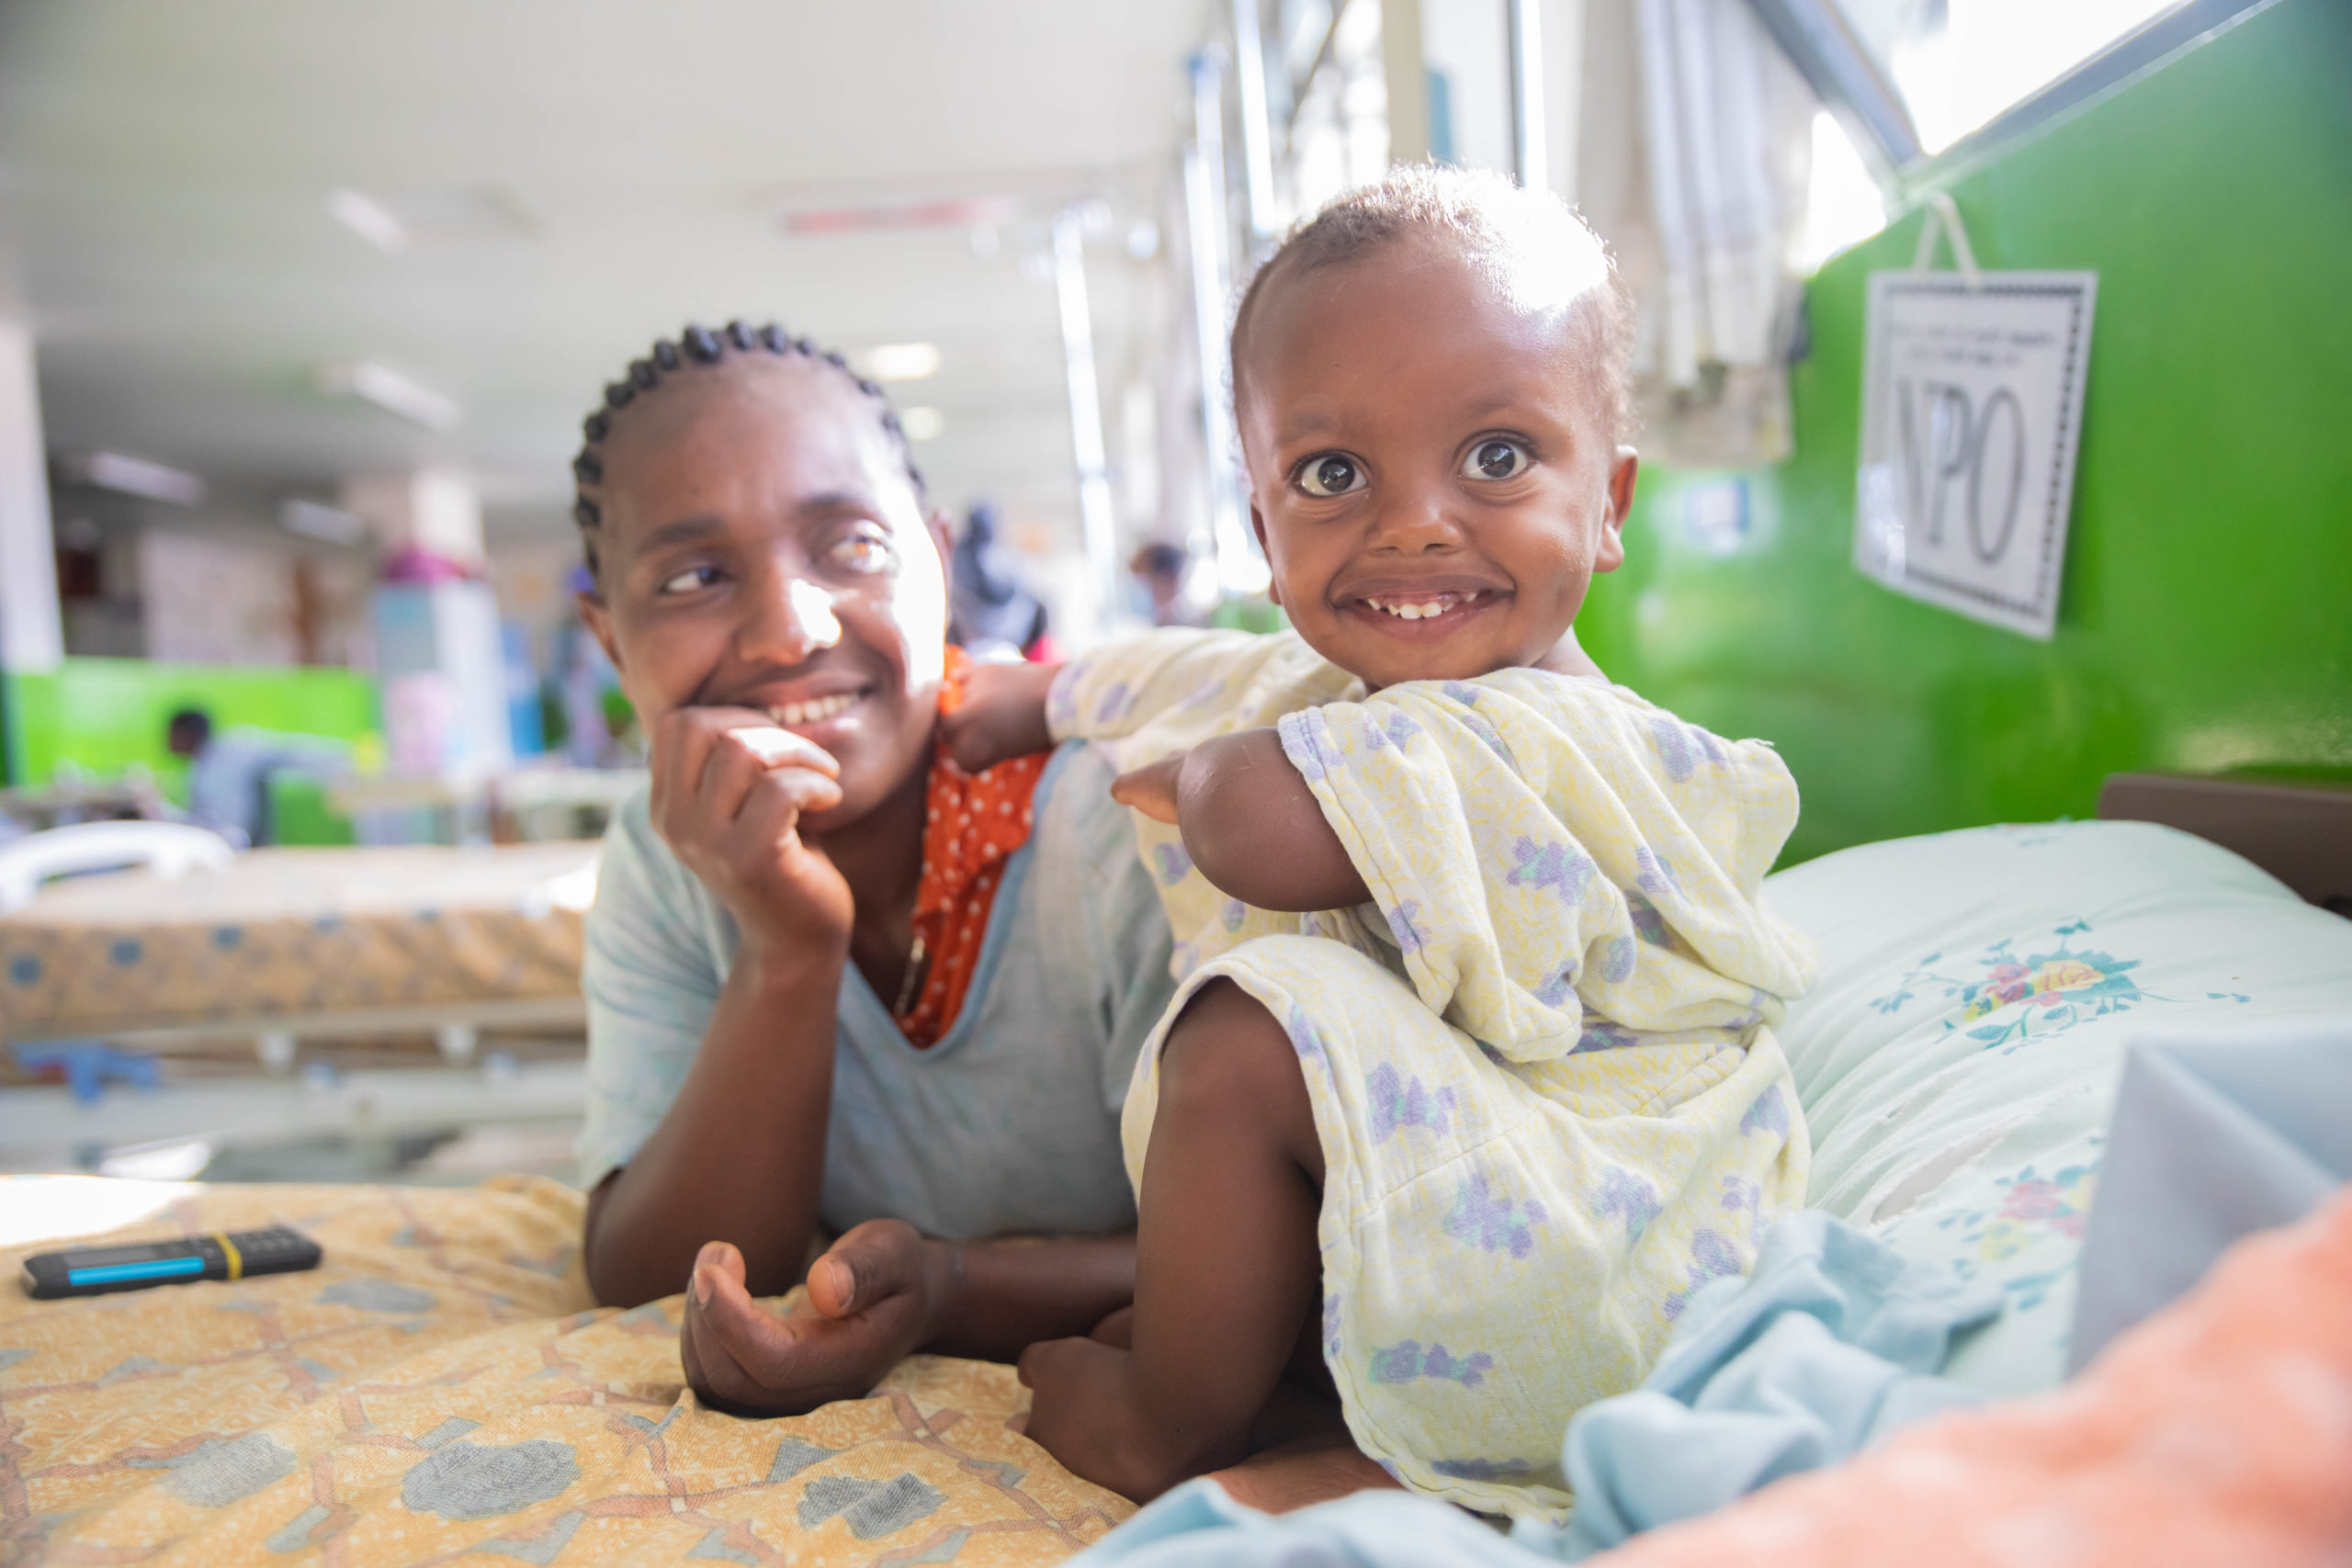 The need for children’s medical care in Ethiopia